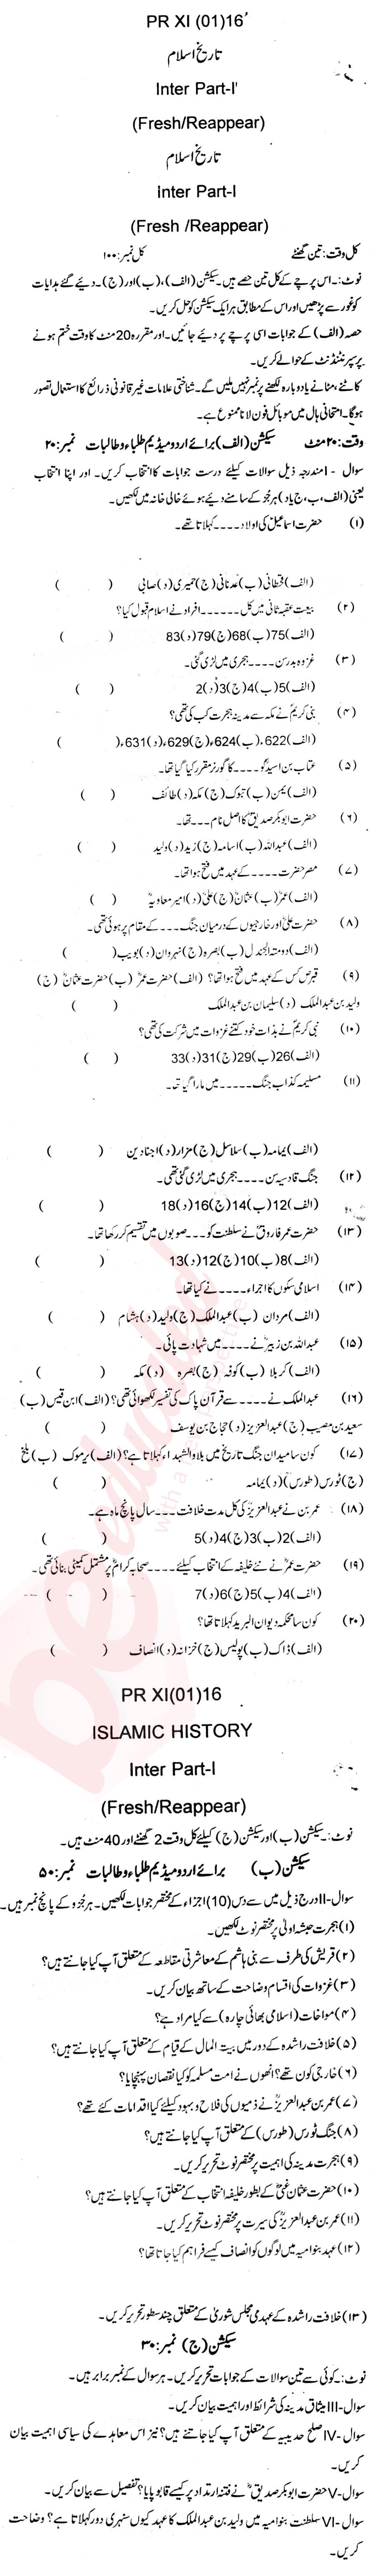 Islamic History FA Part 1 Past Paper Group 1 BISE Abbottabad 2016